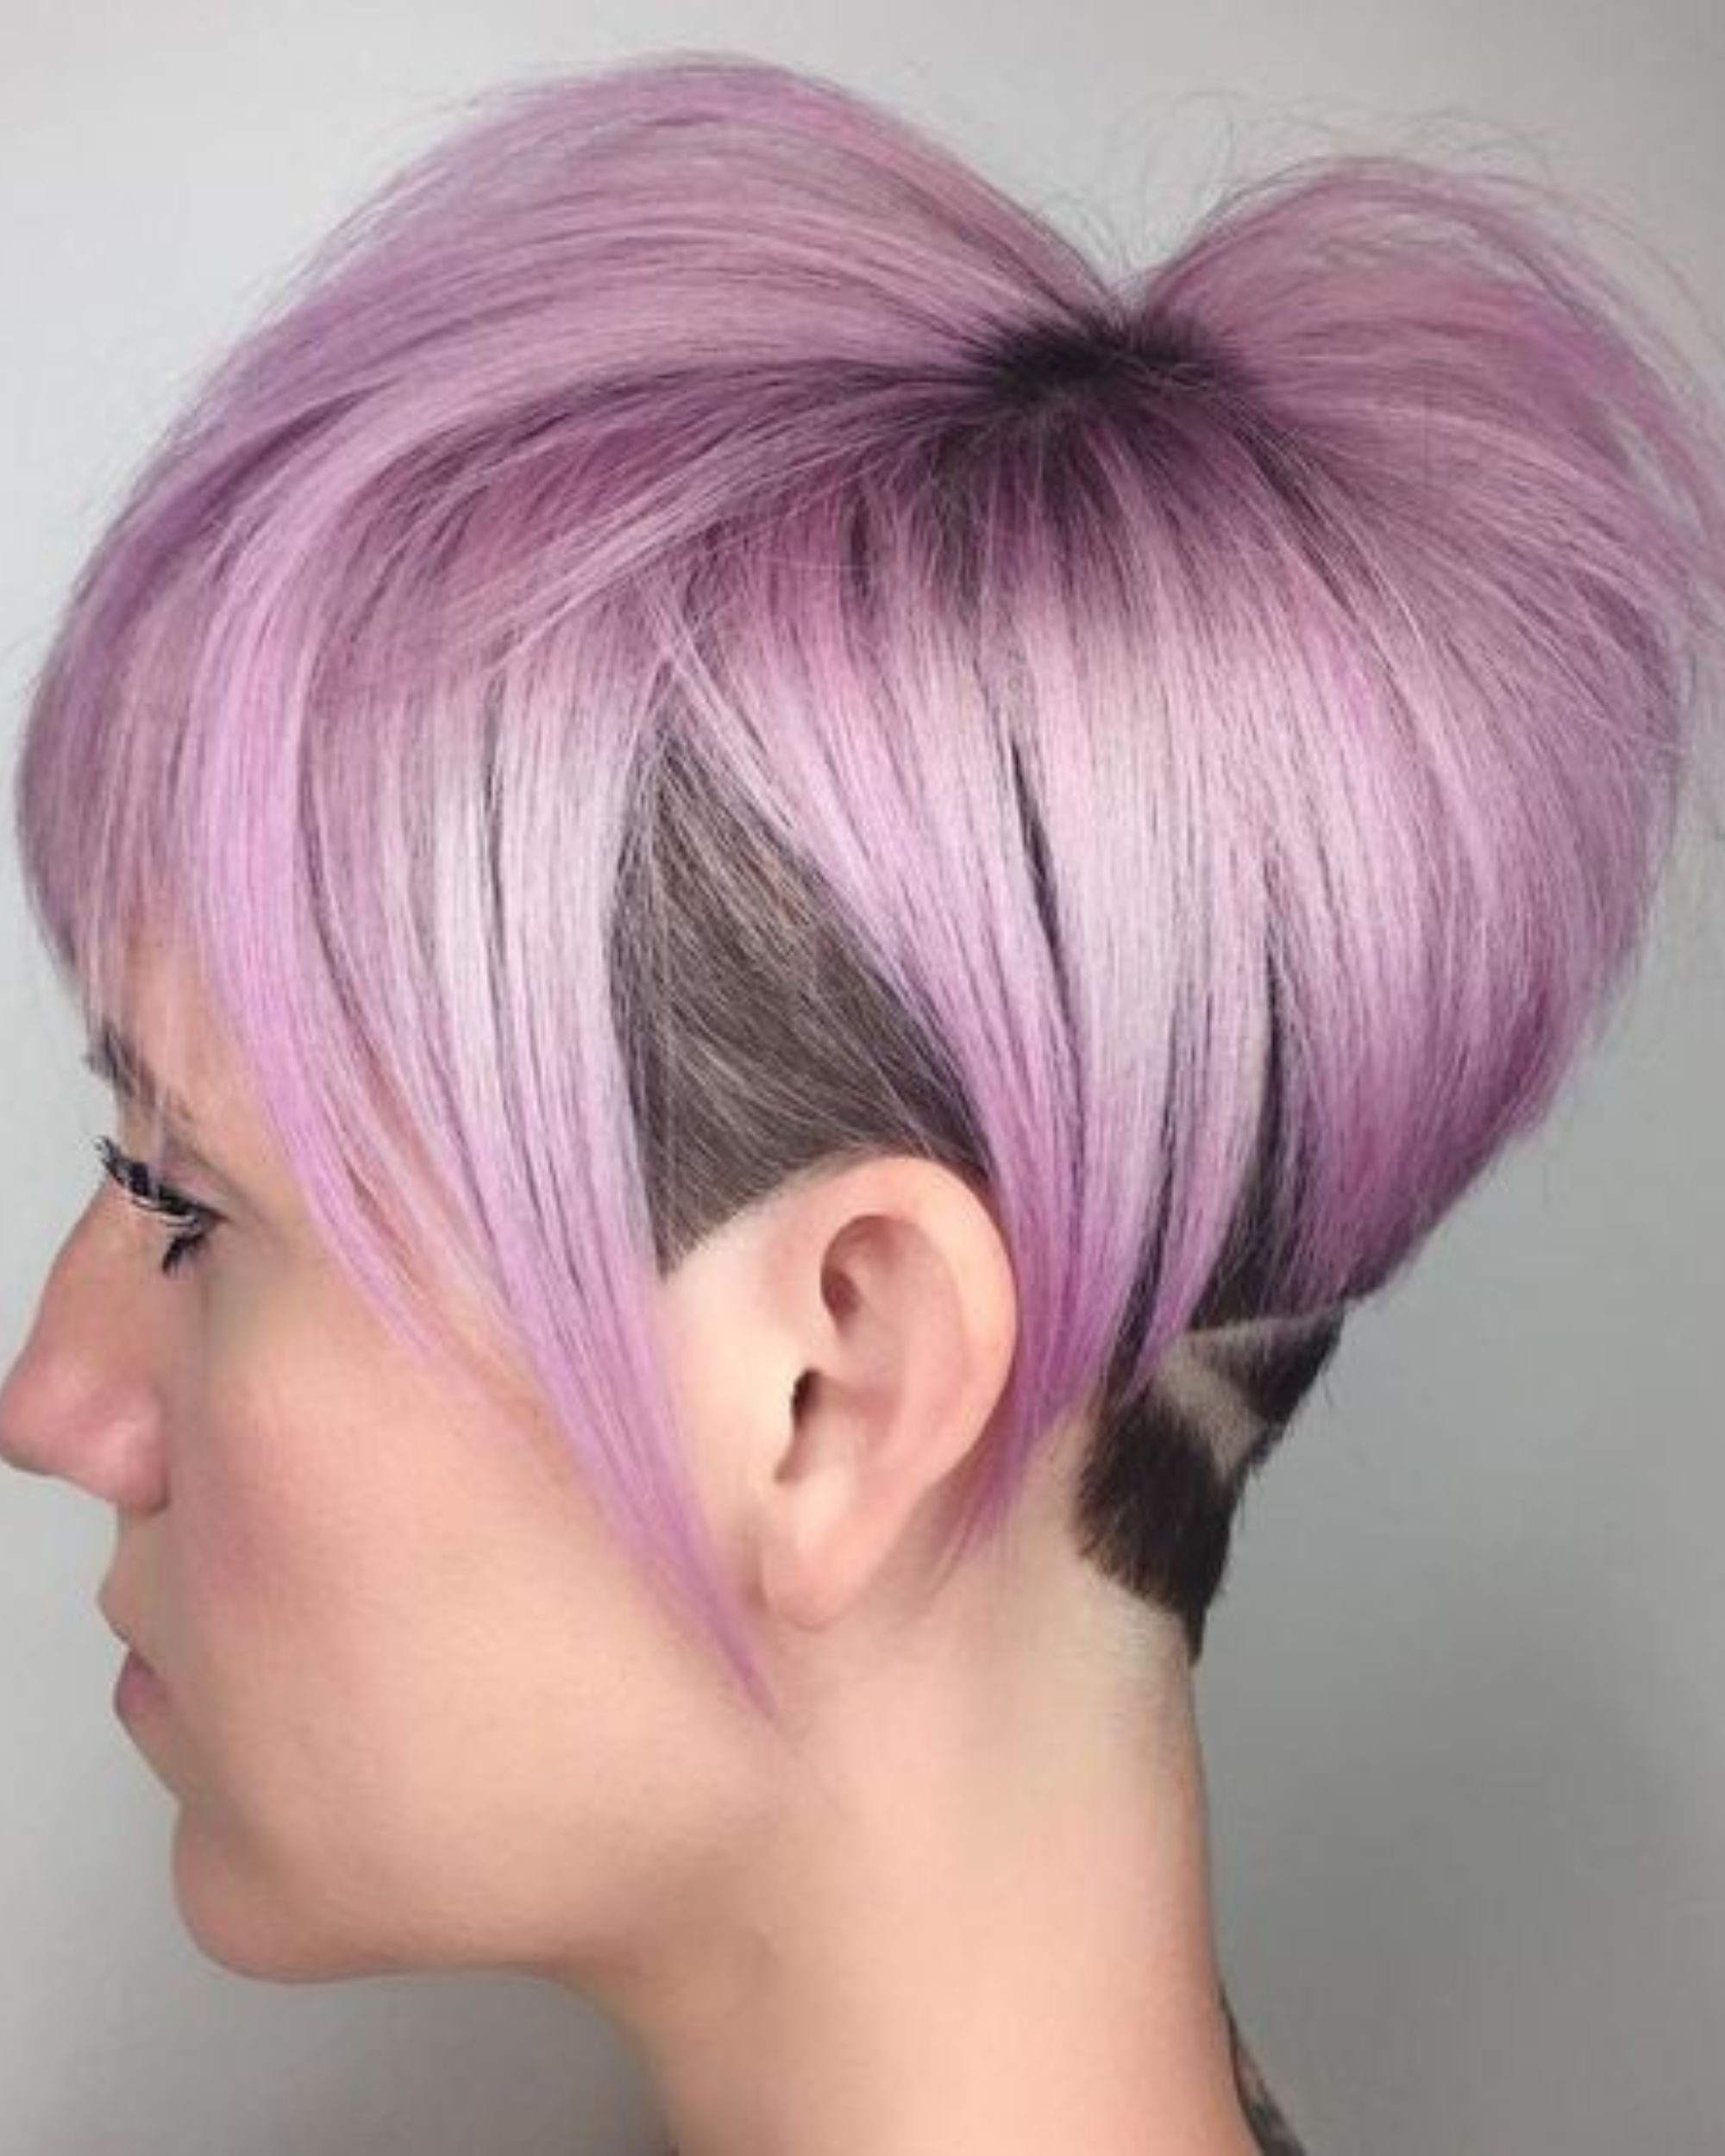 pixie cut shaved sides long top